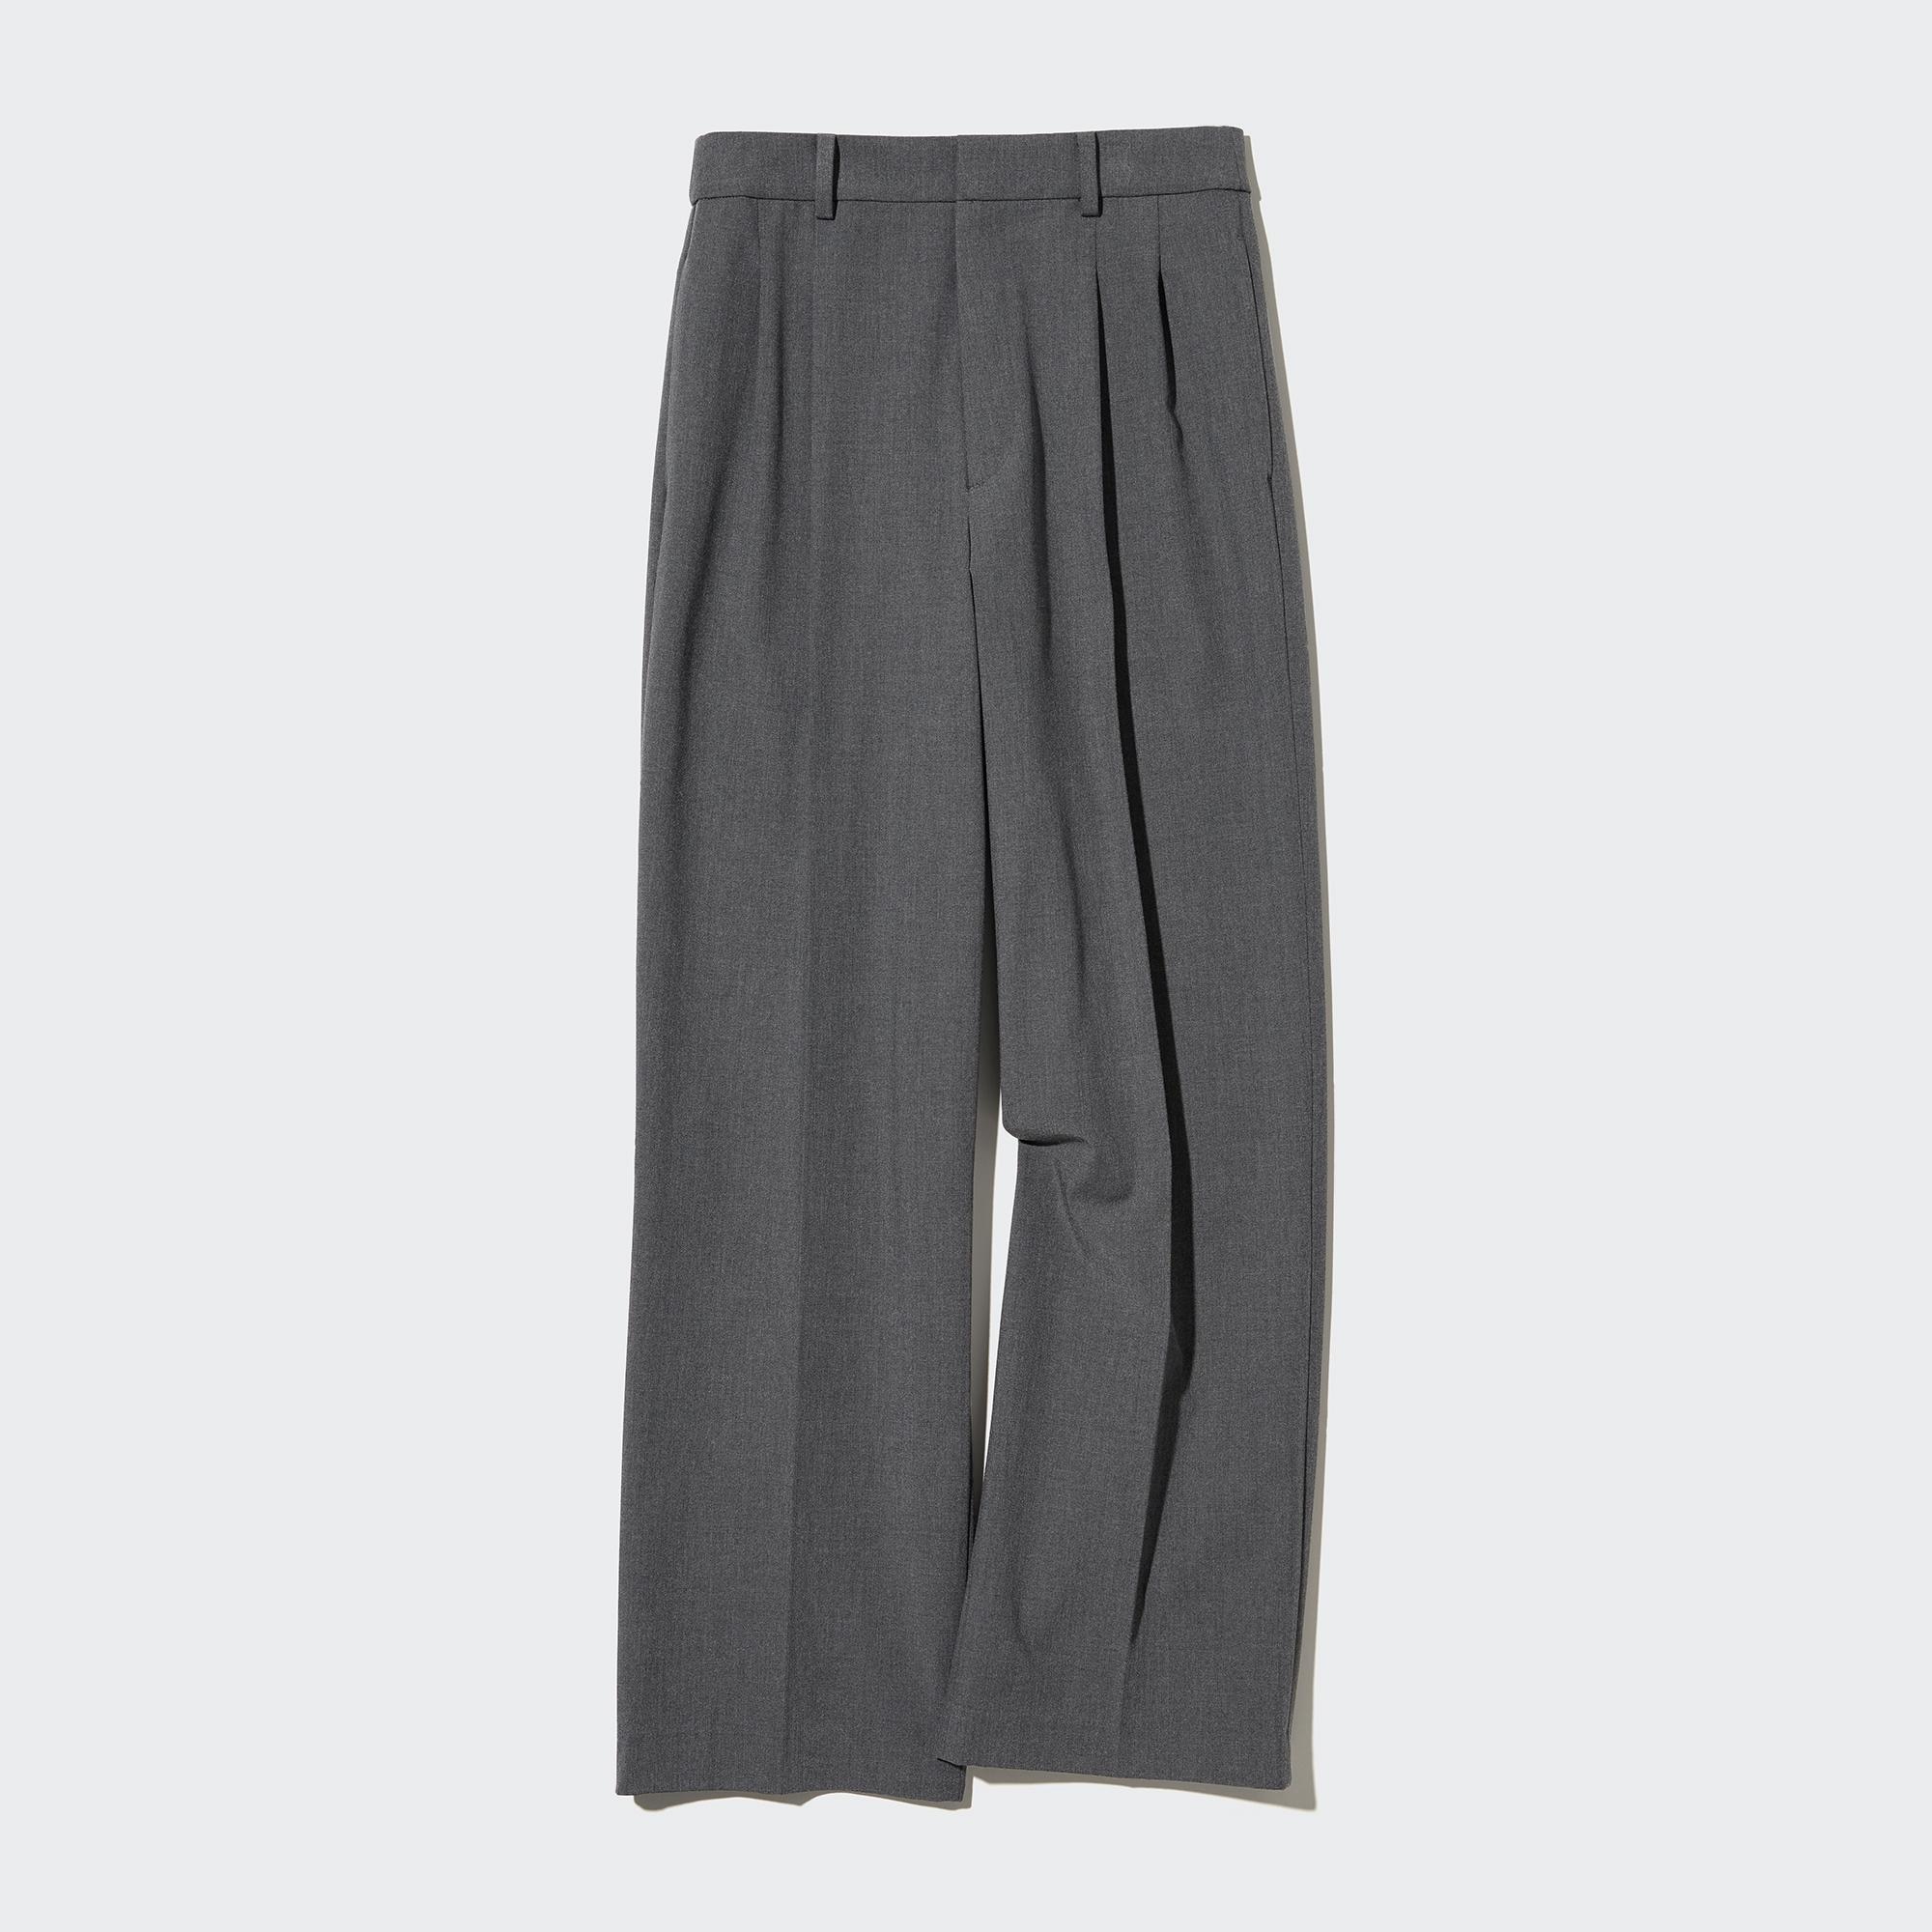 Uniqlo Canada - These Chiffon Pleated Skirt Pants are a MUST-HAVE for your  spring wardrobe. Featuring an easy waist design, these pants are so comfy  you won't want to change out of